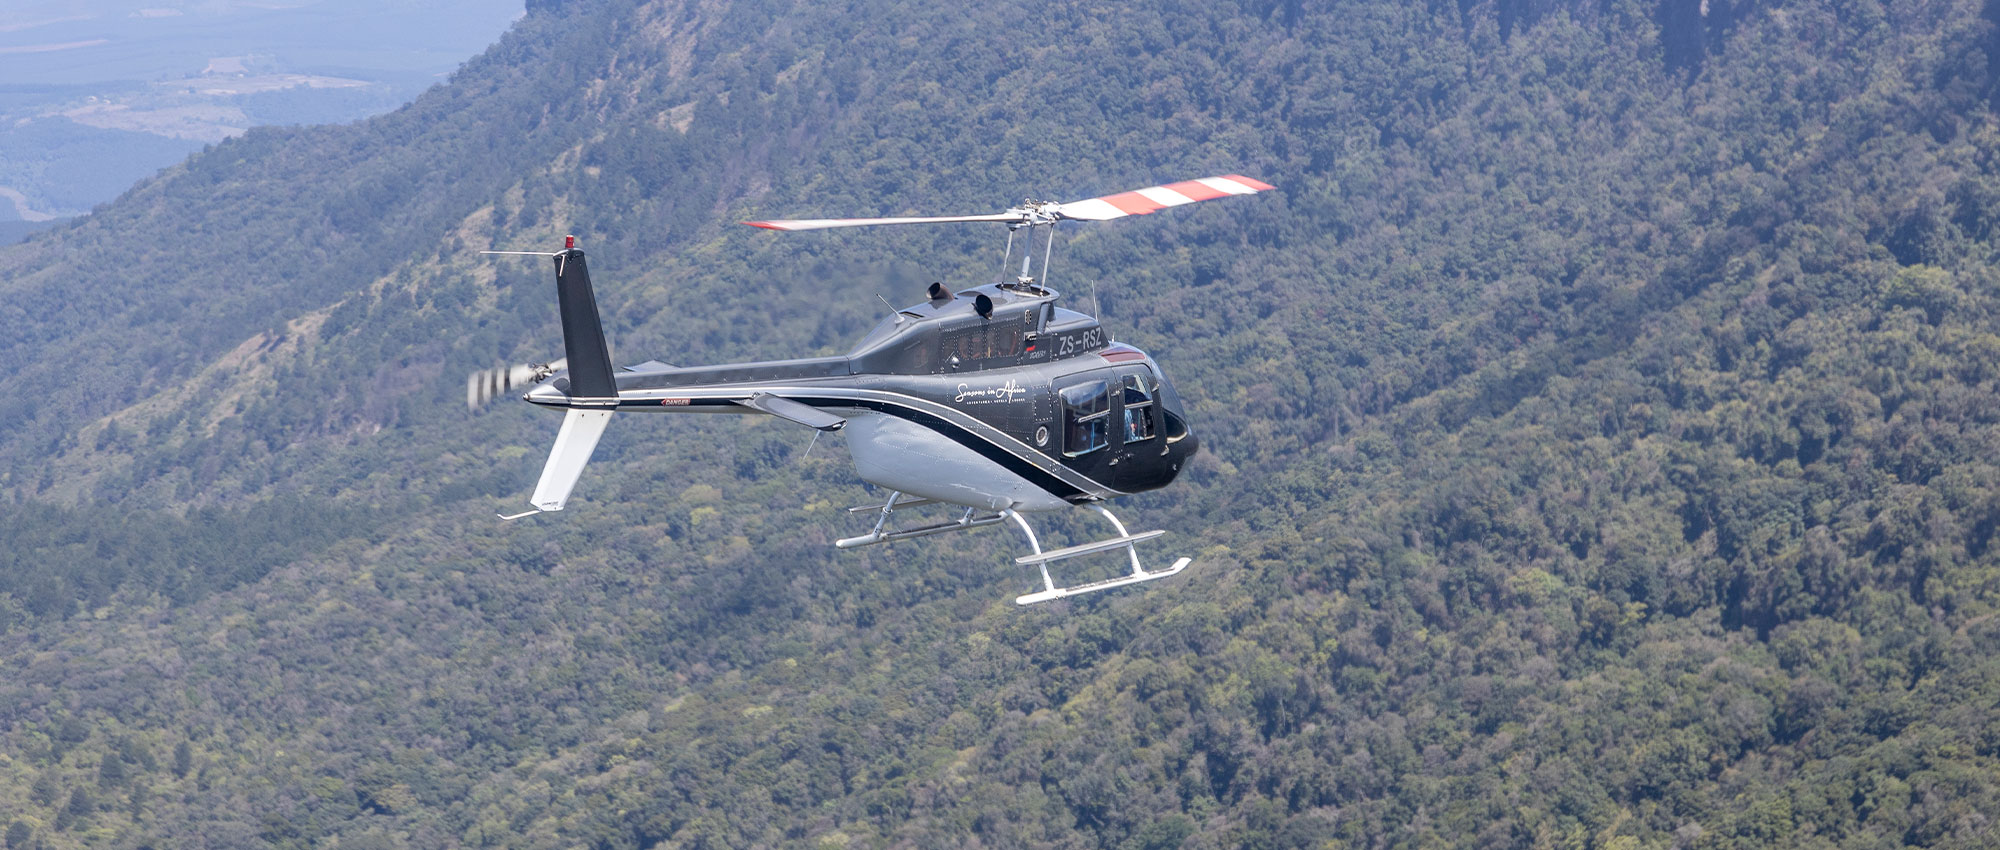 An Exclusive Experience in the Skies: Mpumalanga Helicopter Company